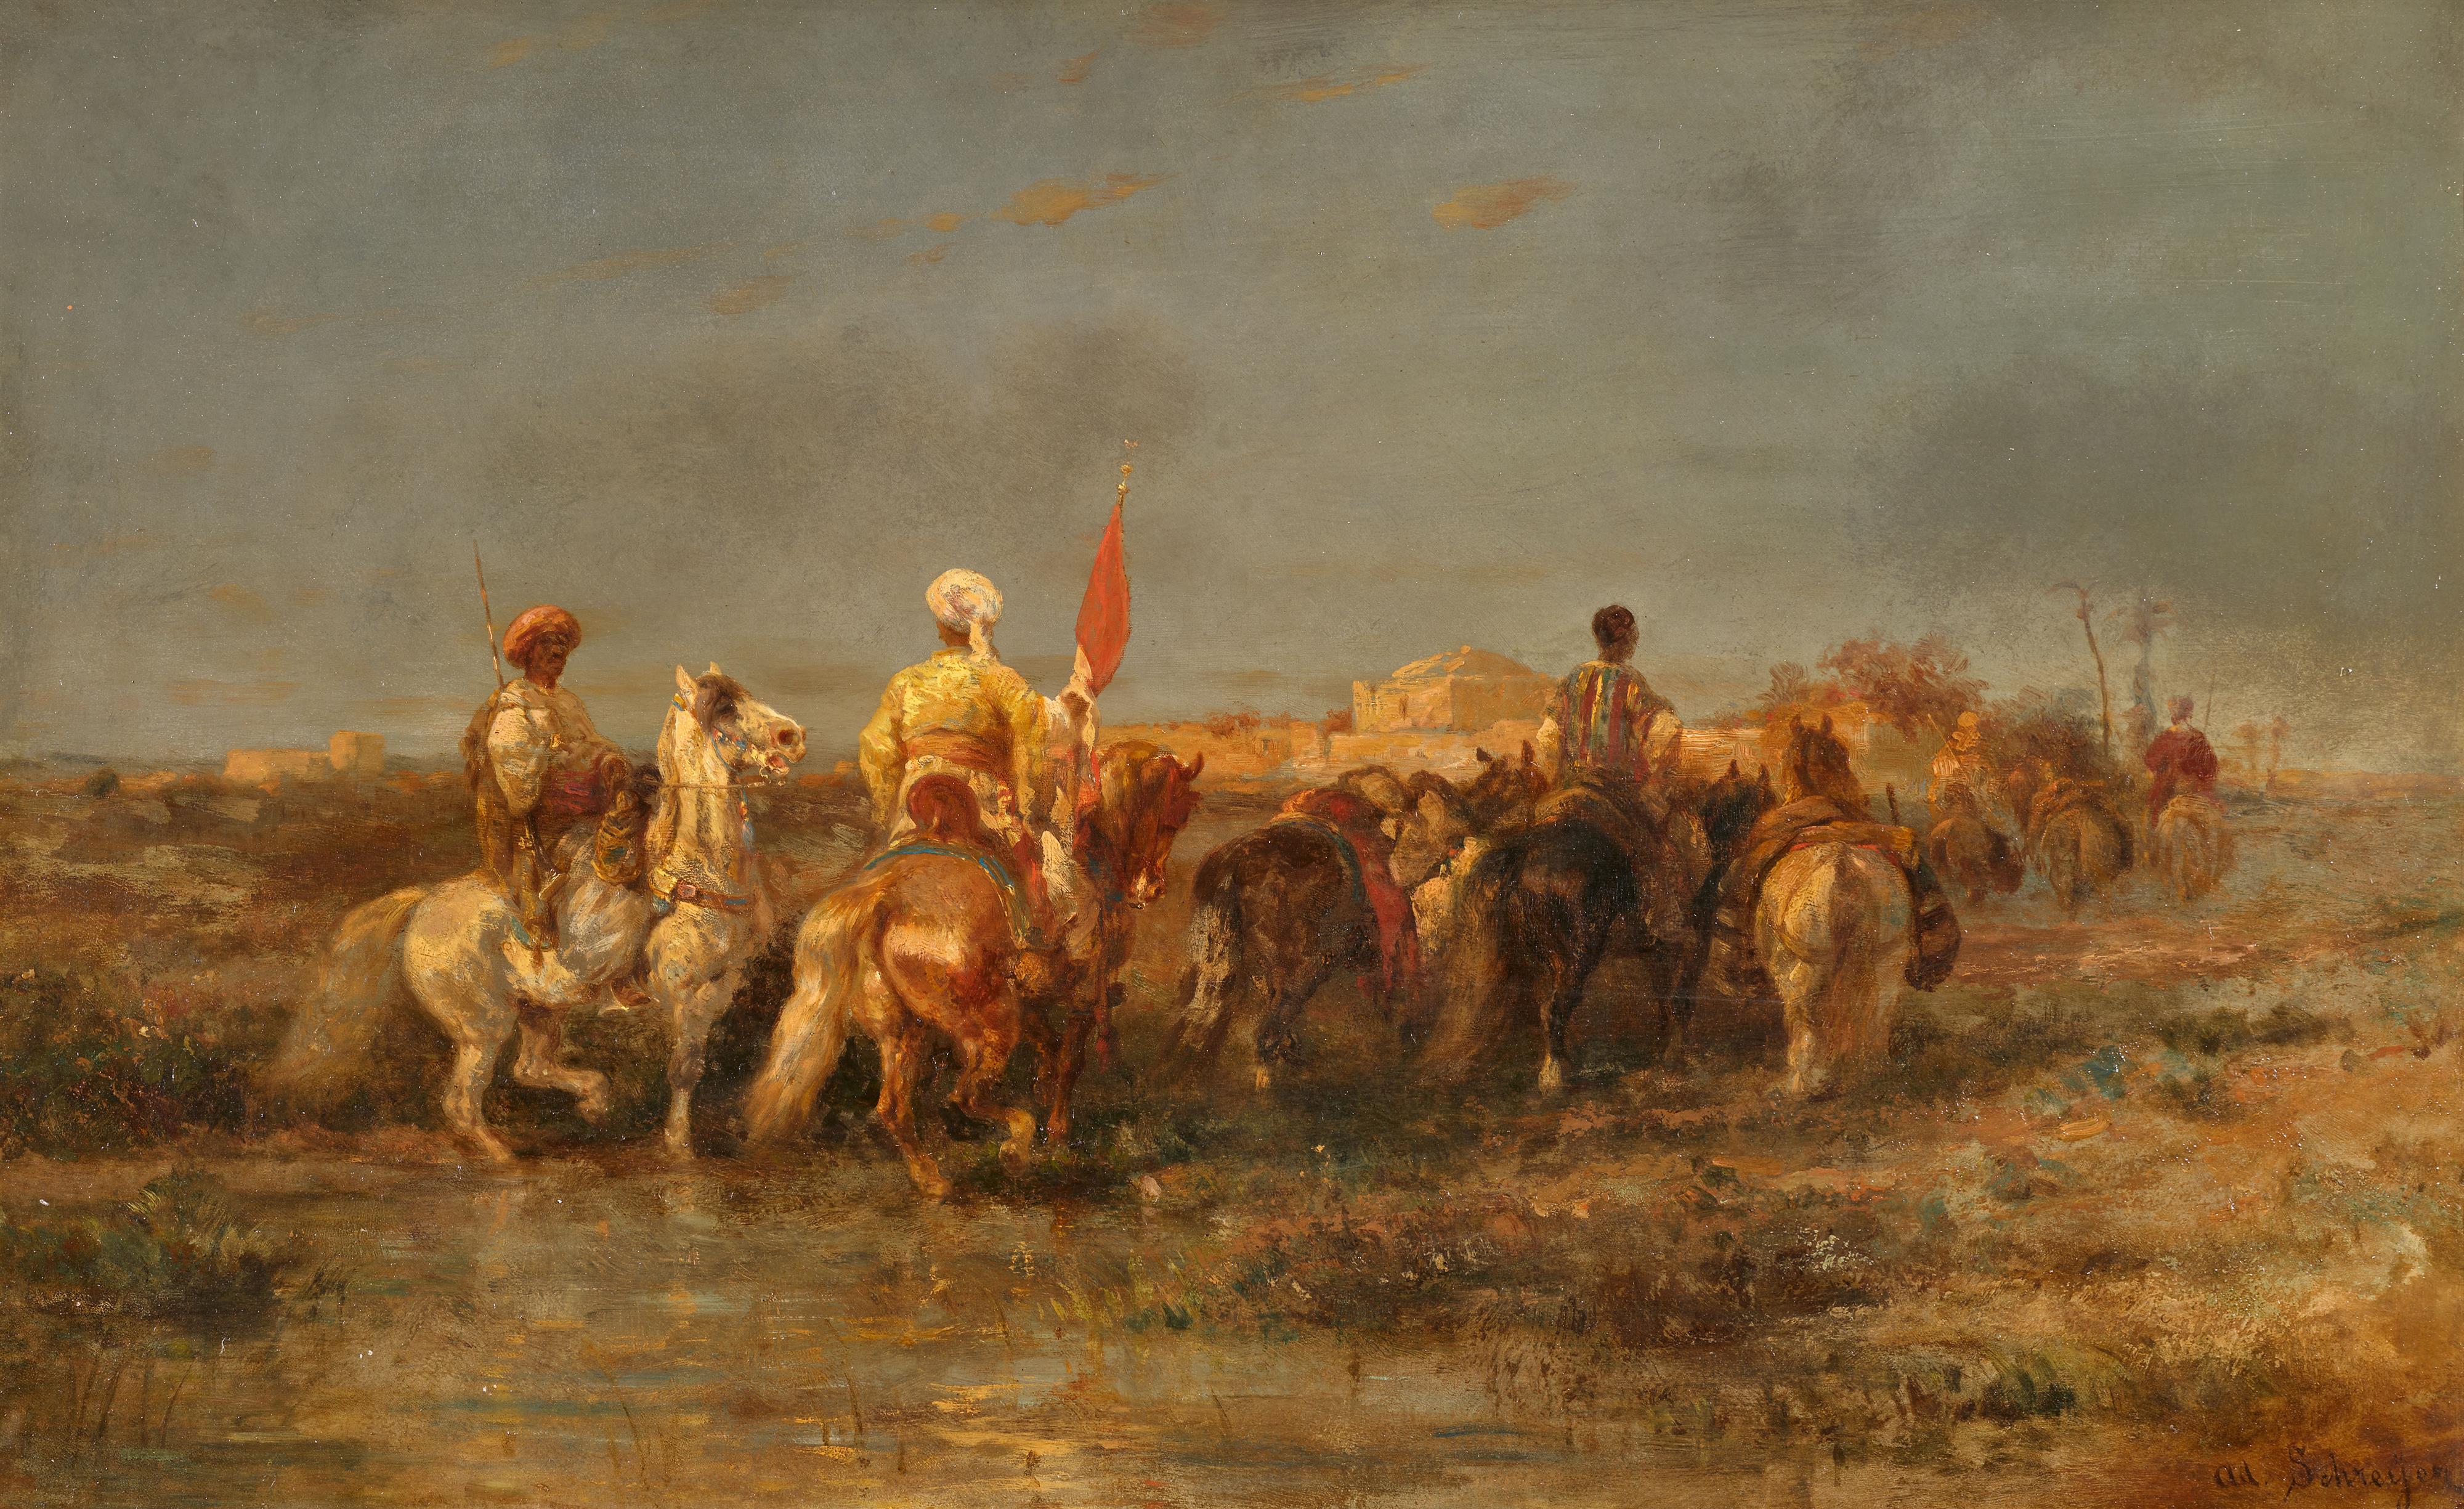 Adolf Schreyer - Mounted Orientals in front of a town - image-1